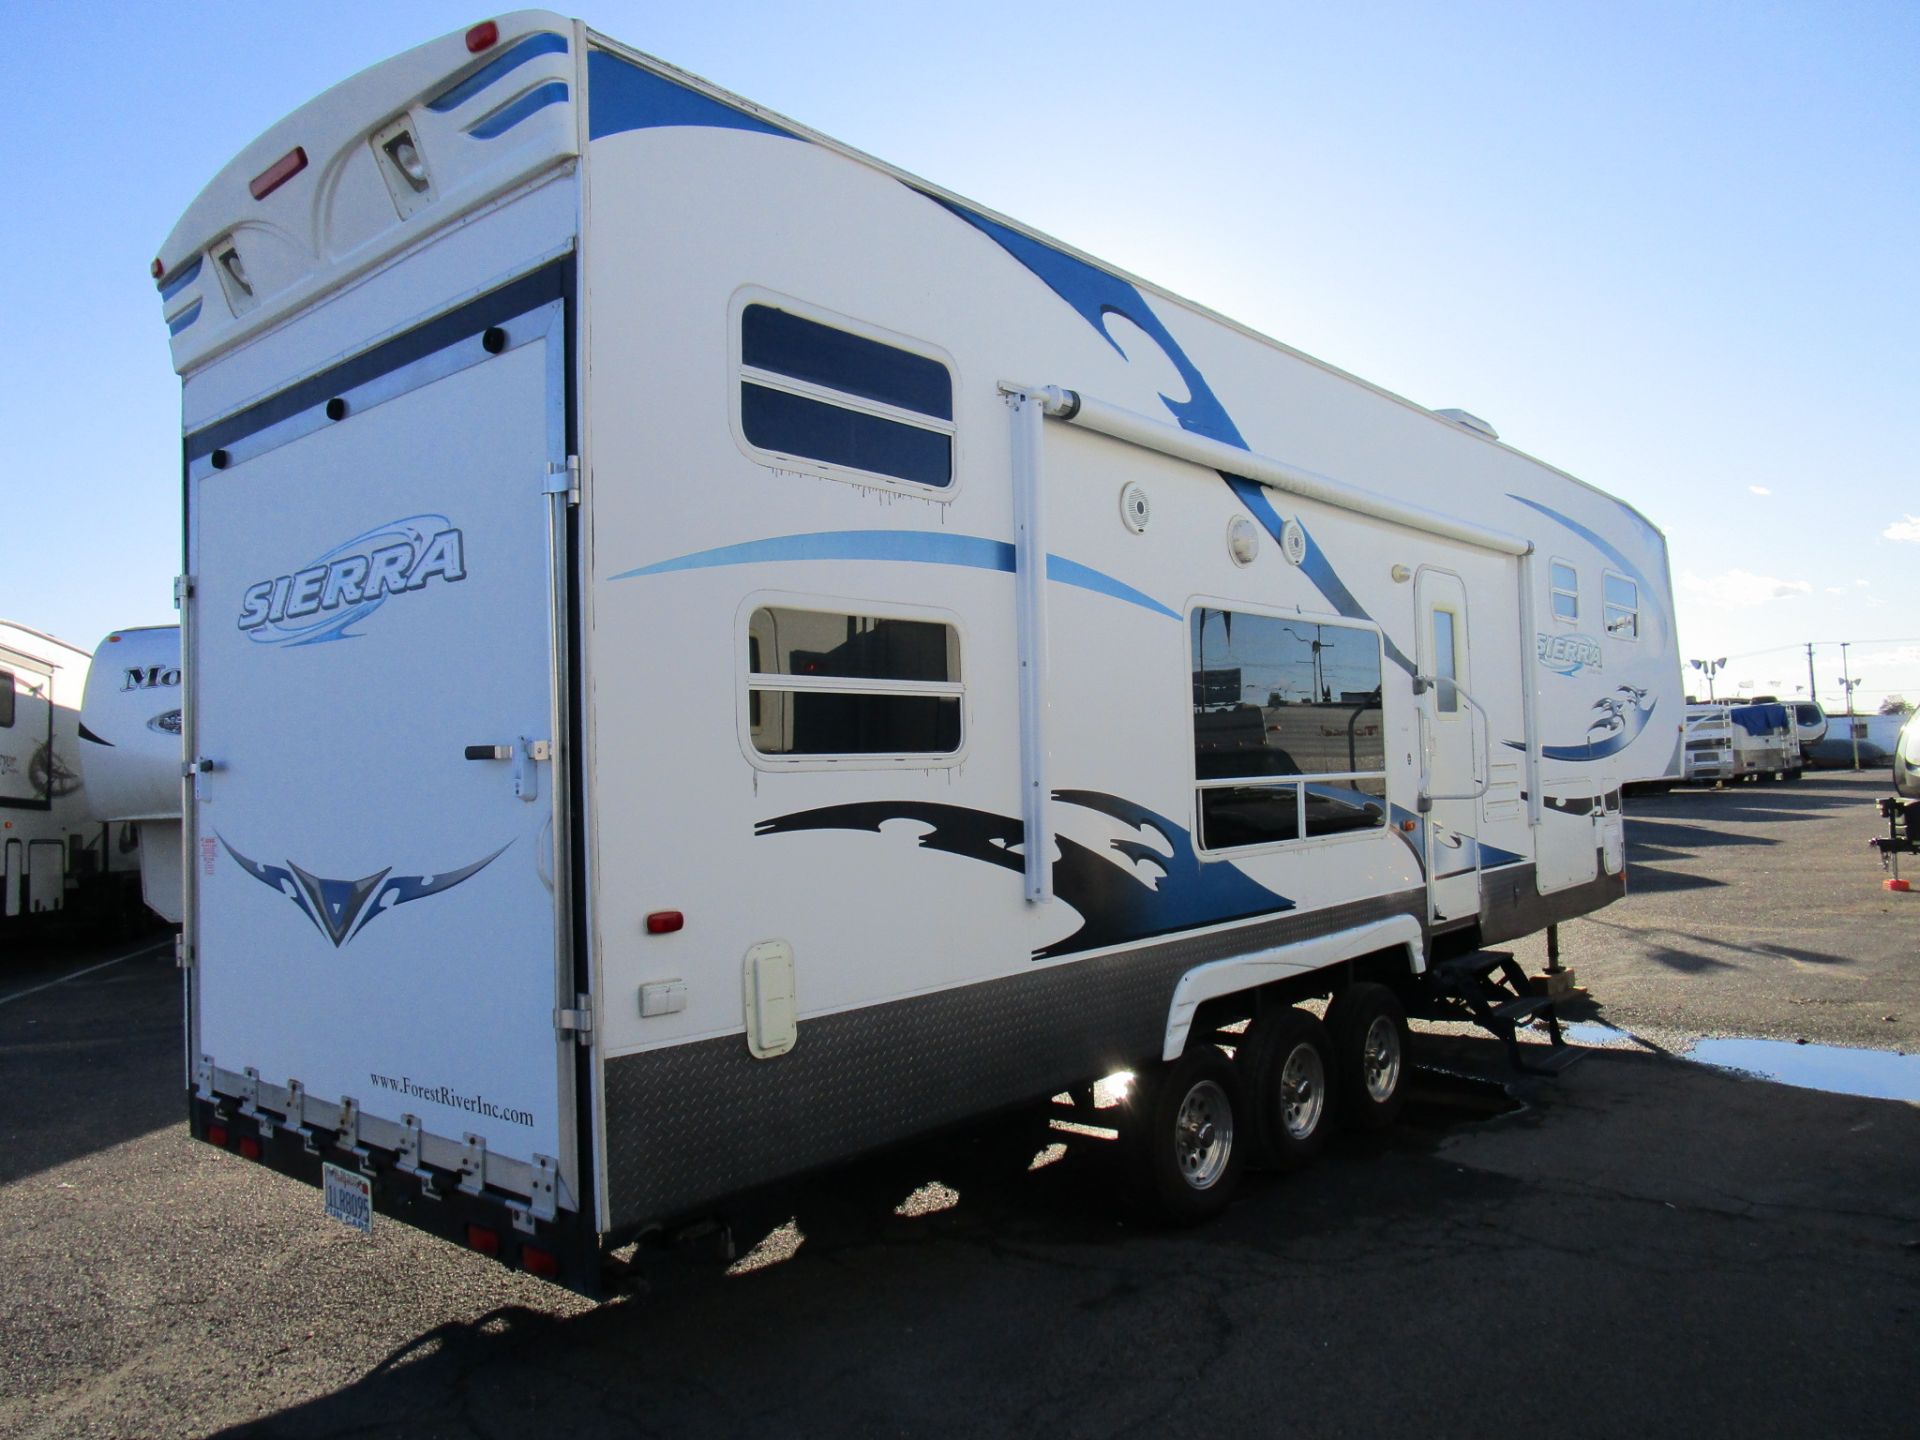 RV for sale: 2008 Forest River Sierra 5th Wheel Toy Hauler 34' in Lodi 2008 Forest River Sierra 5th Wheel